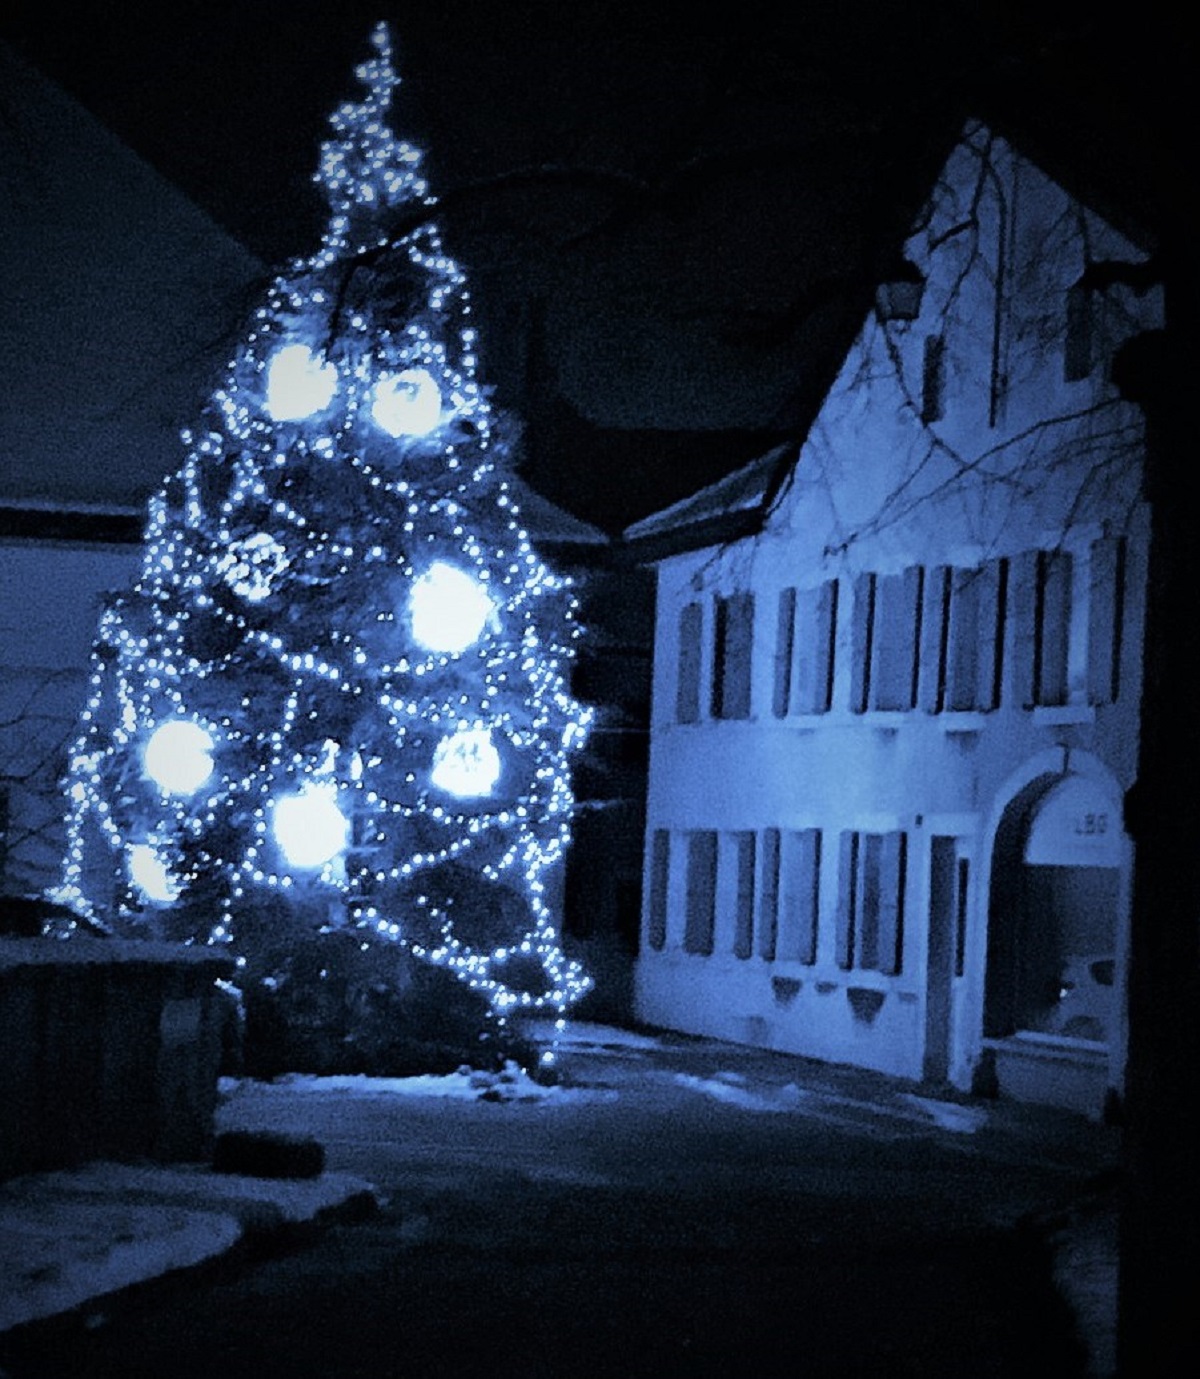 Illuminated Christmas tree at night time beside an old building